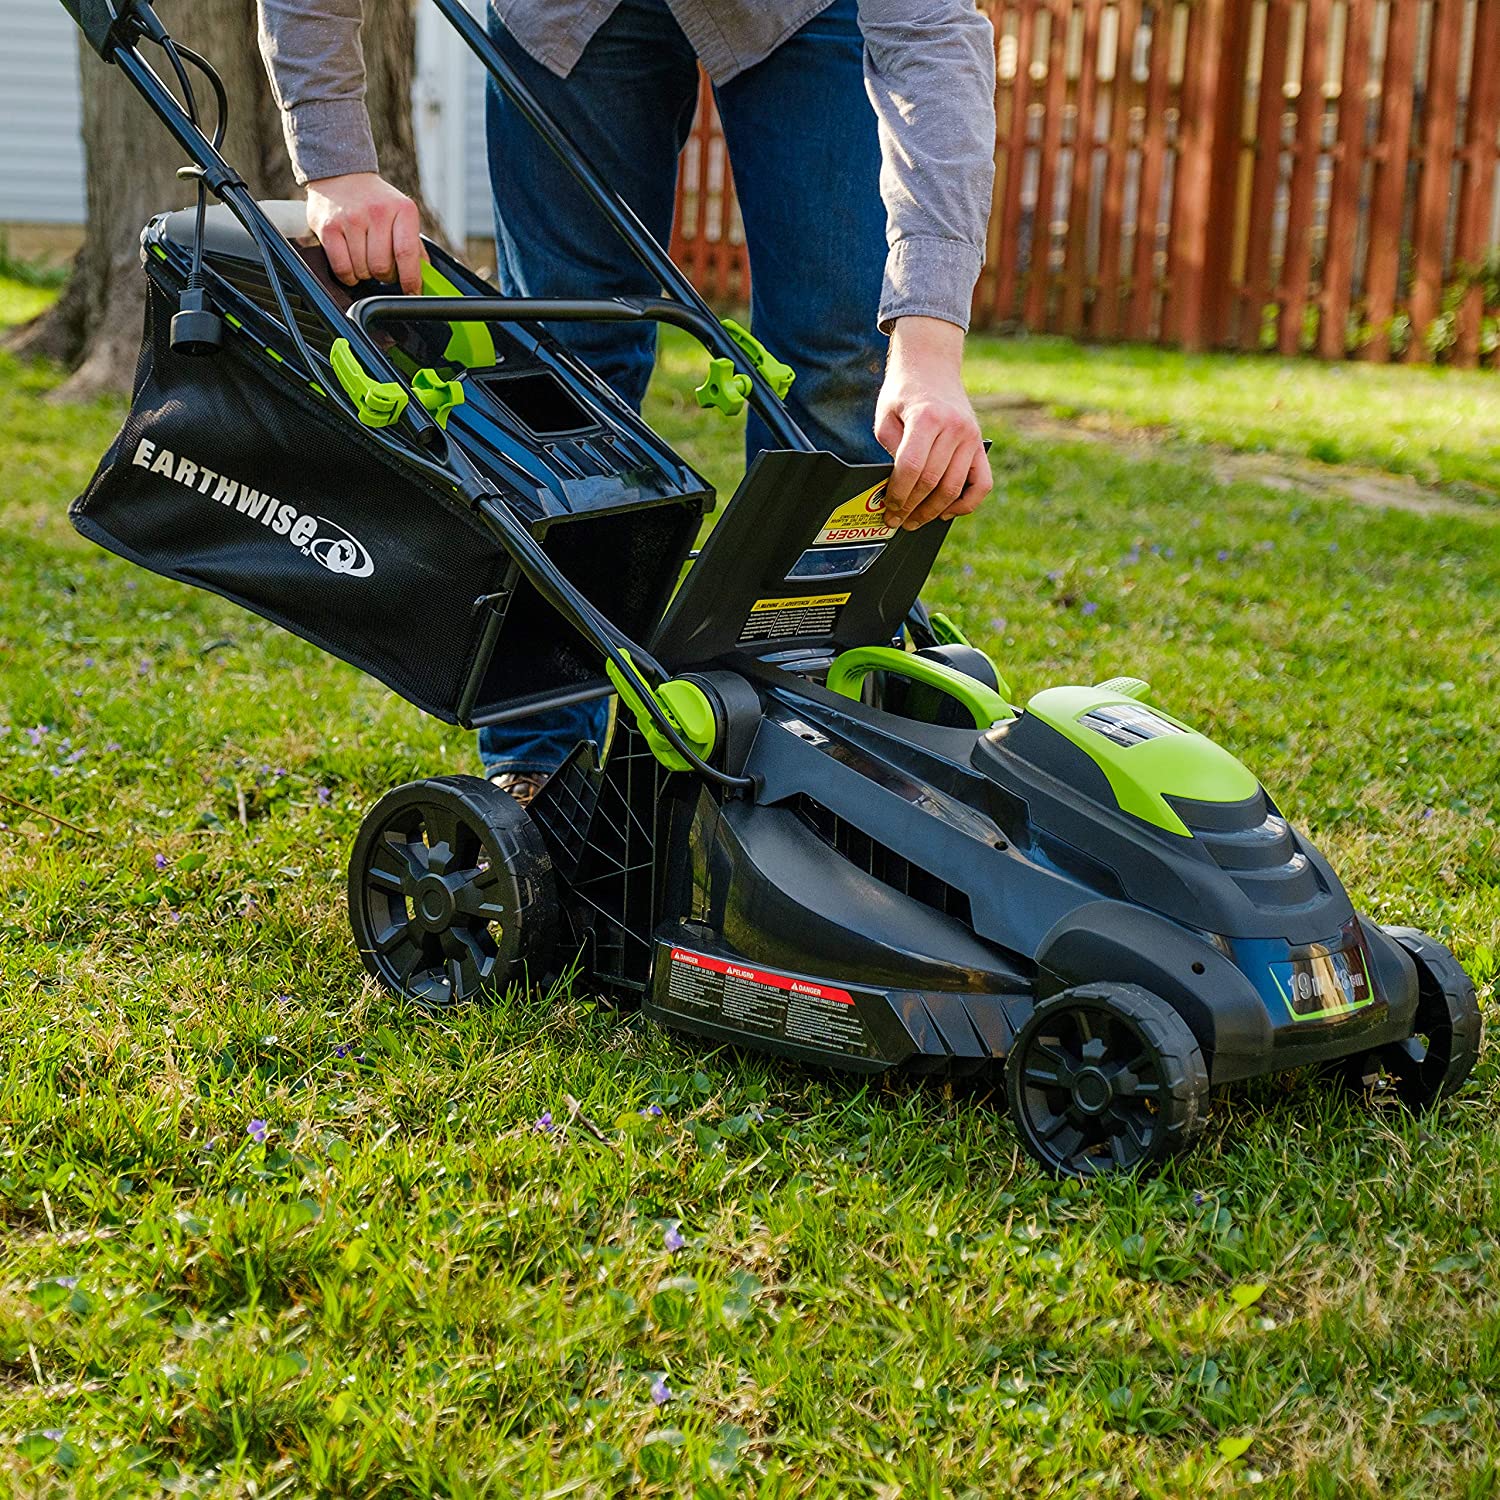 Earthwise Power Tools by ALM 19 Corded Electric Mower – American